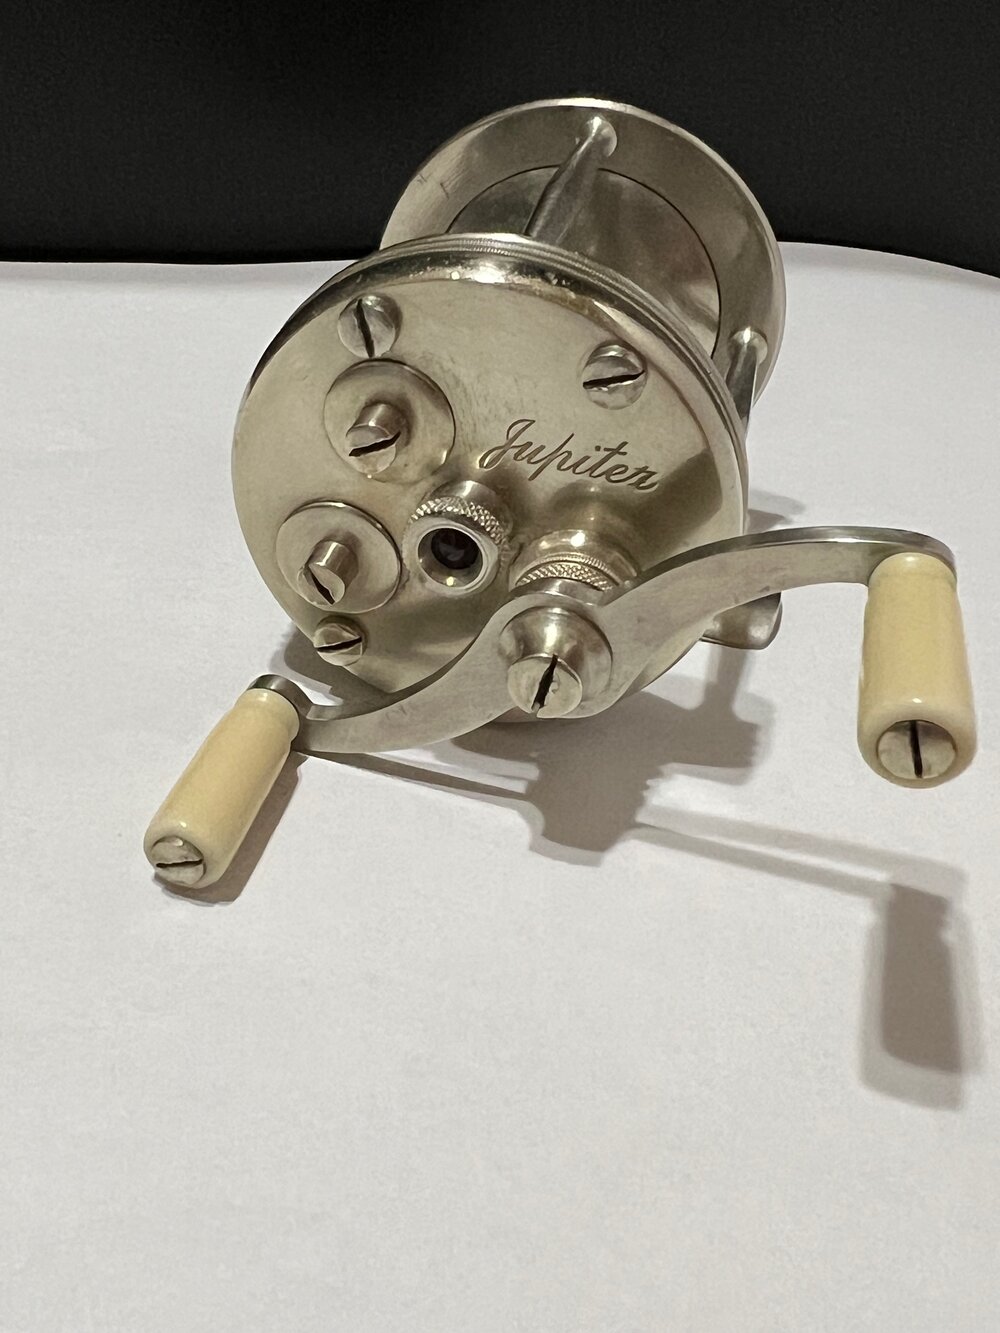 Montague JUPITER 4 Screw with Rare Milled Pillars Jeweled German Silver  Double Grip Handle Circa-1914 — VINTAGE FISHING REELS